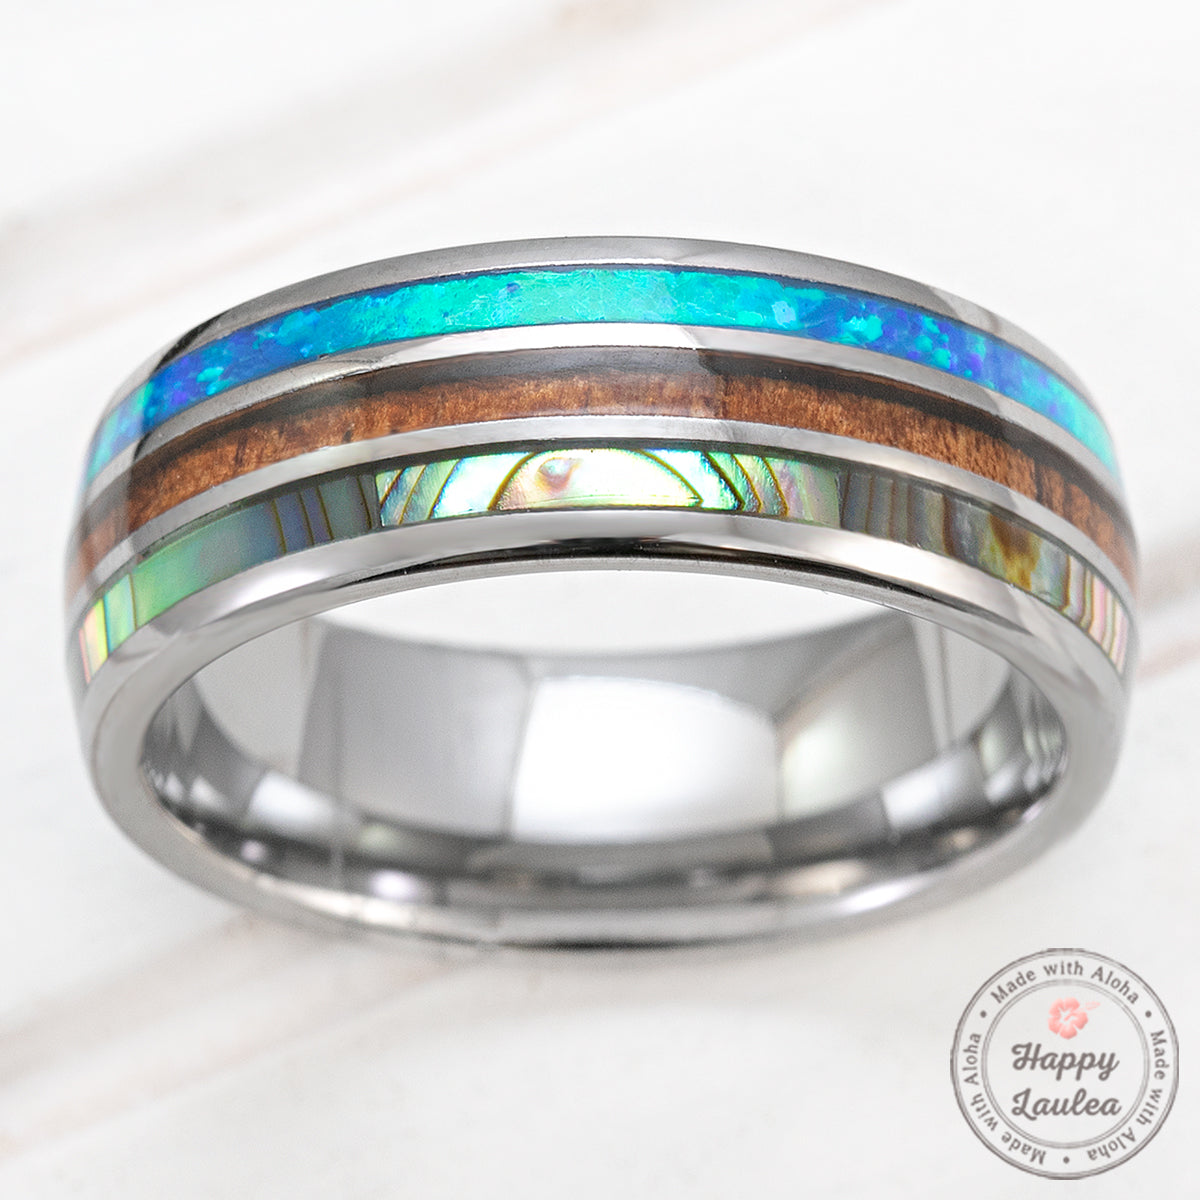 Tungsten Carbide 8mm Ring with Abalone Shell, Koa Wood, & Blue Opal Tri-Inlay - Dome Shape, Comfort Fitment